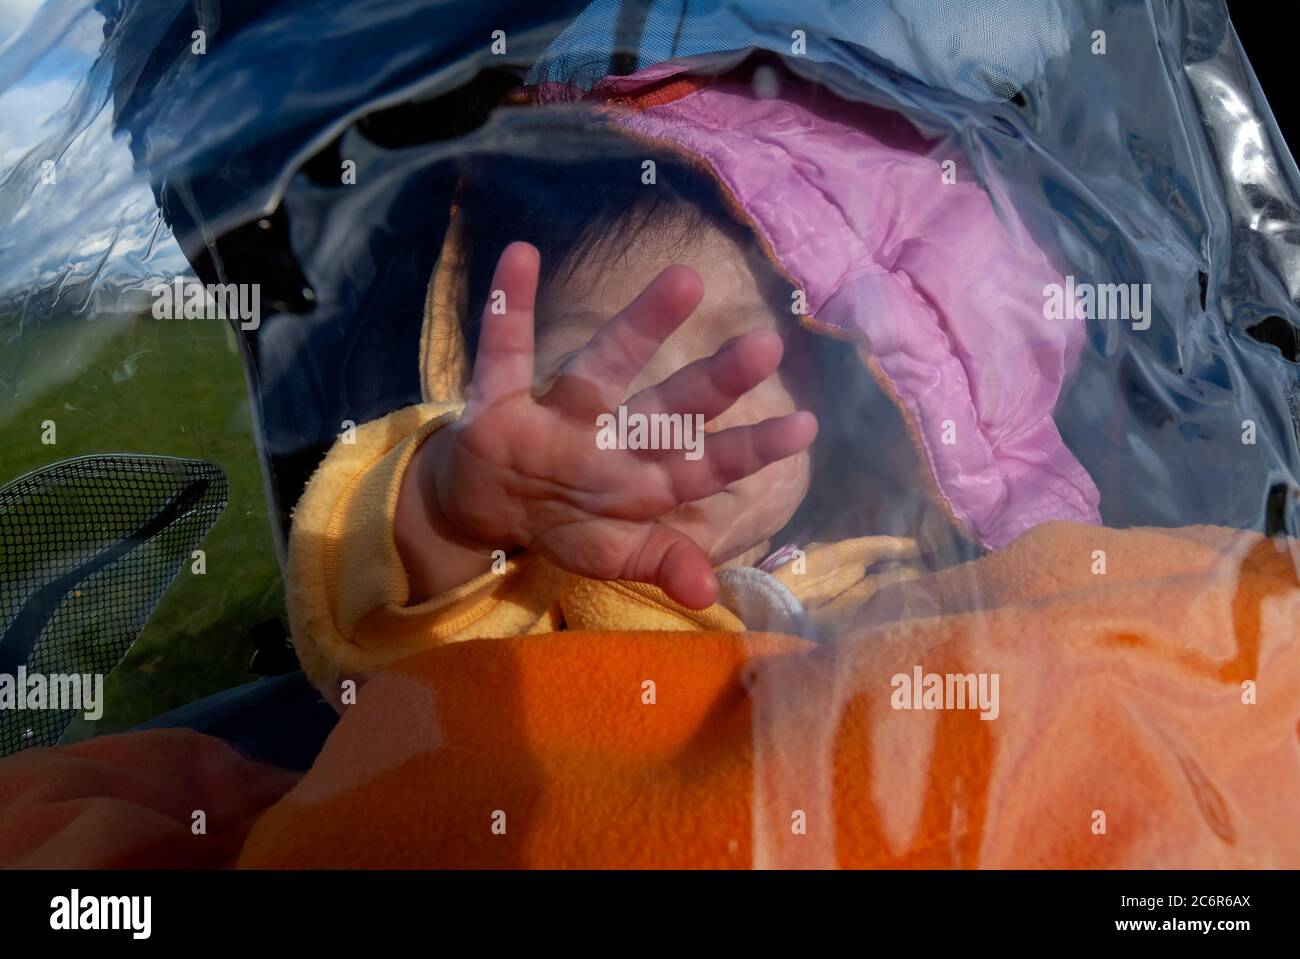 Toddler sitting in stroller covered with plastic. Stock Photo